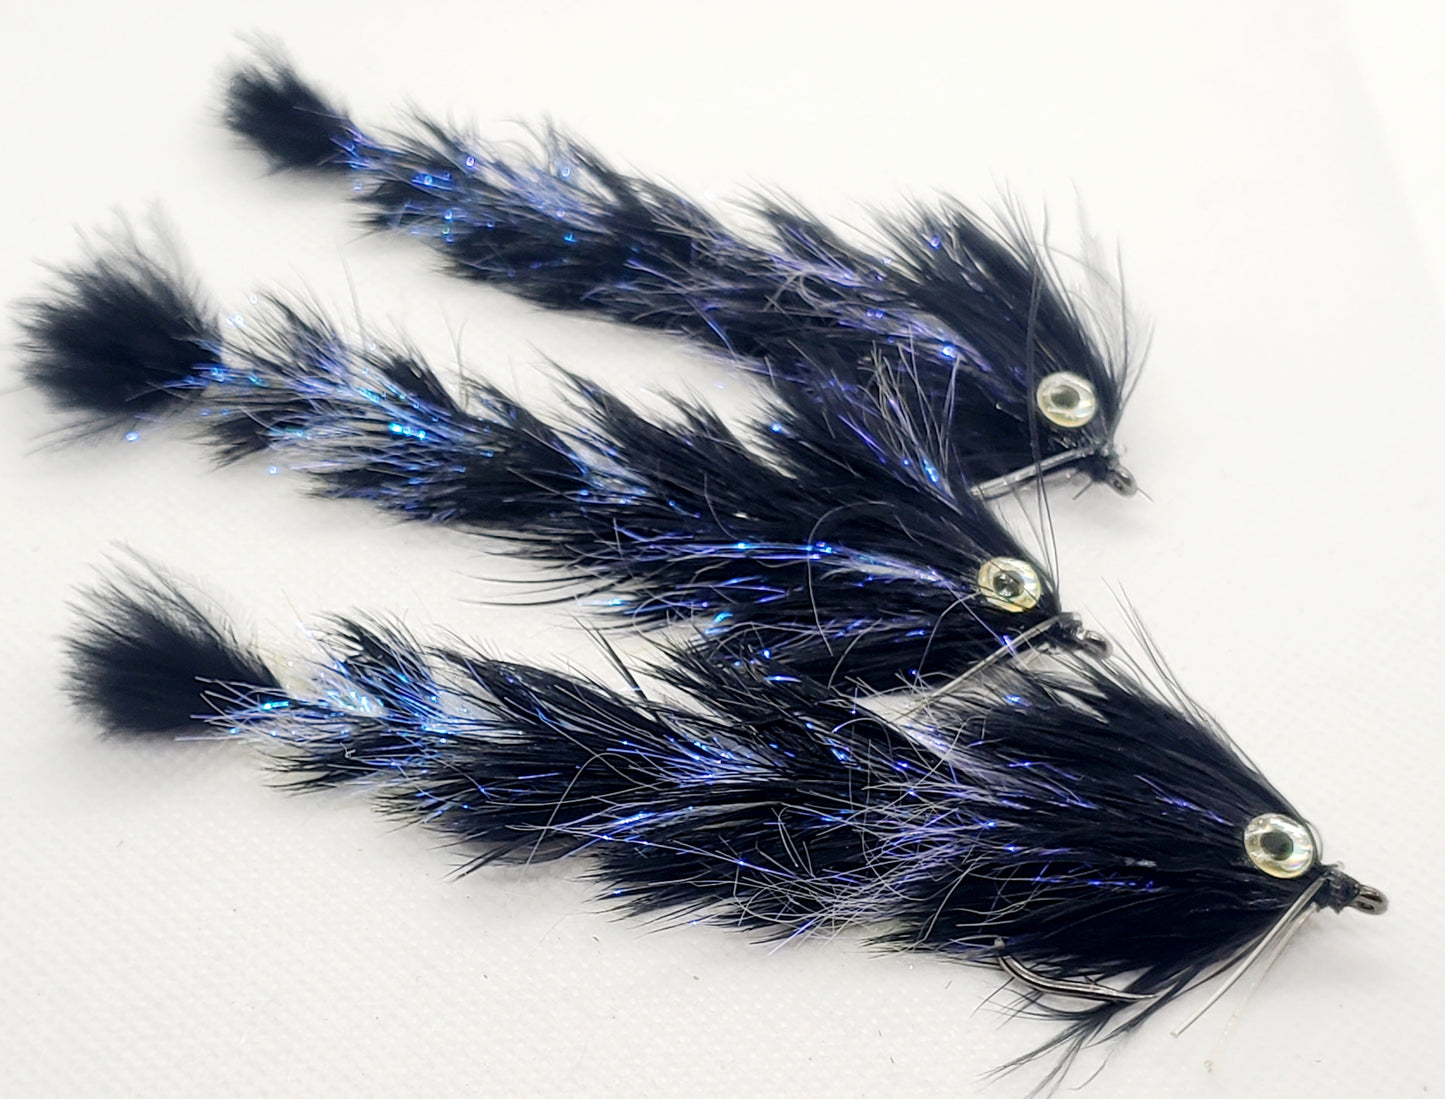 Feather Changer Fly, Chocklett's Game Changer, Feather Changer 4.5"